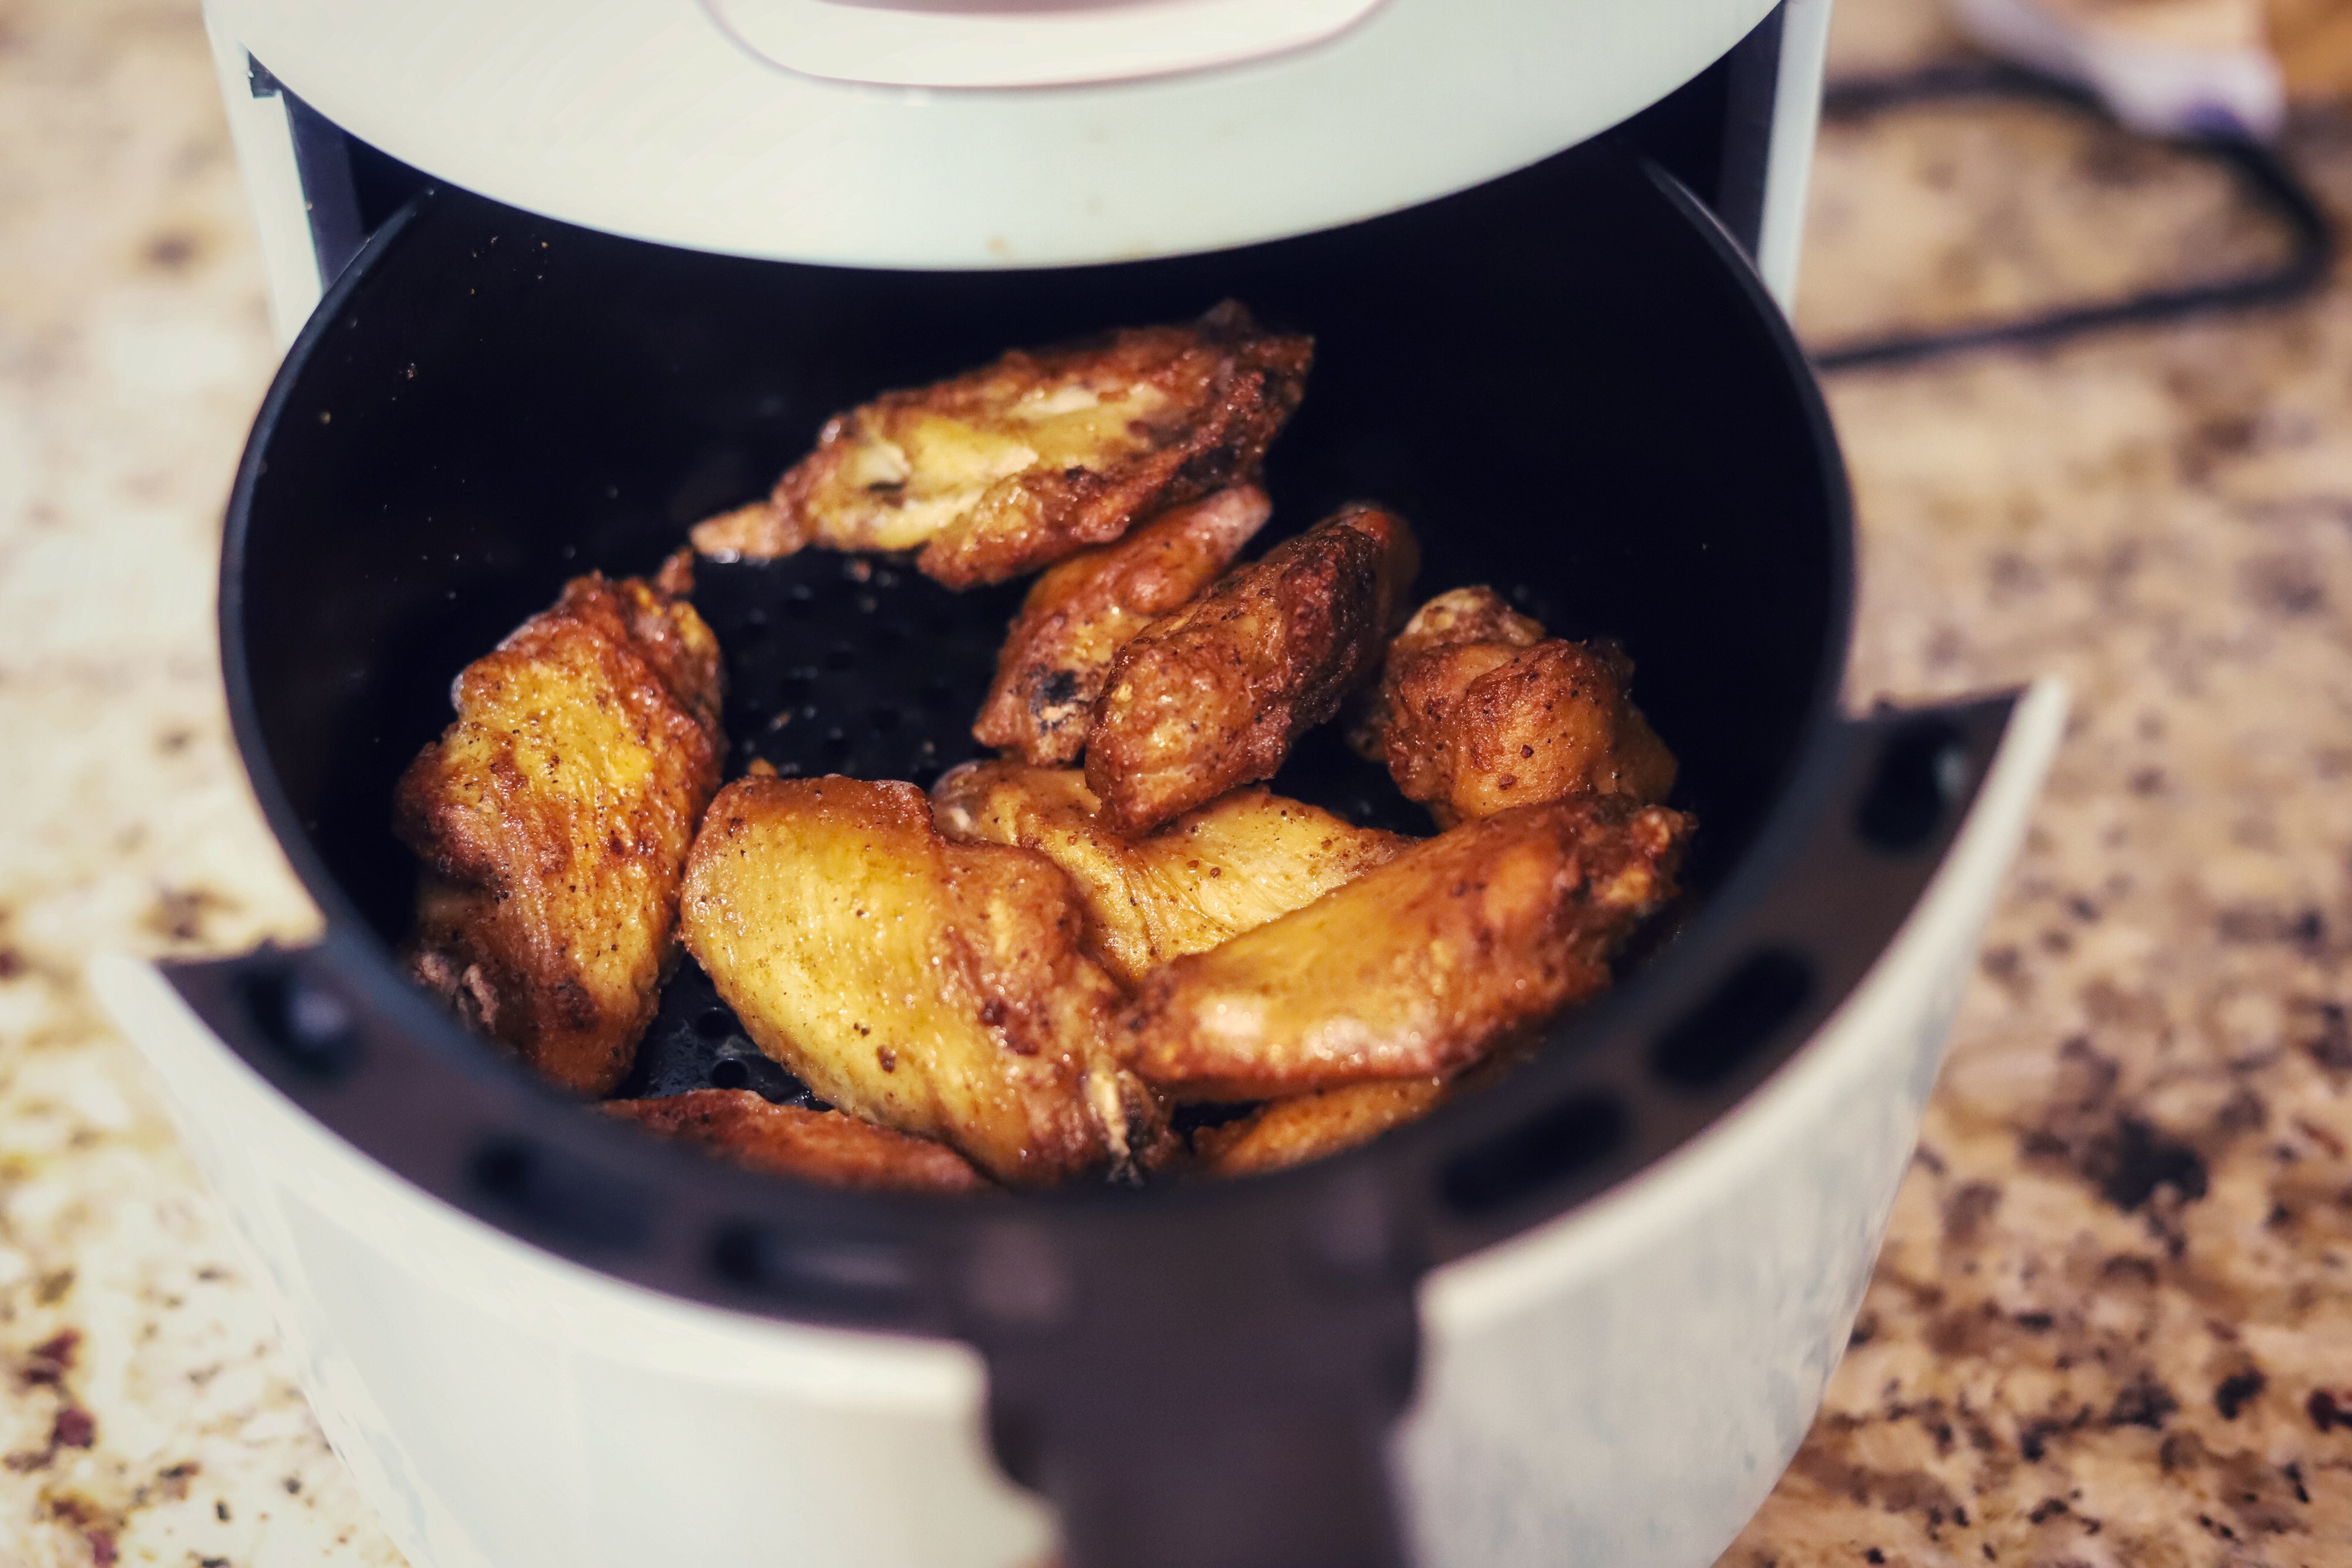 Best Air Fryer Deals for 2022 - The Manual